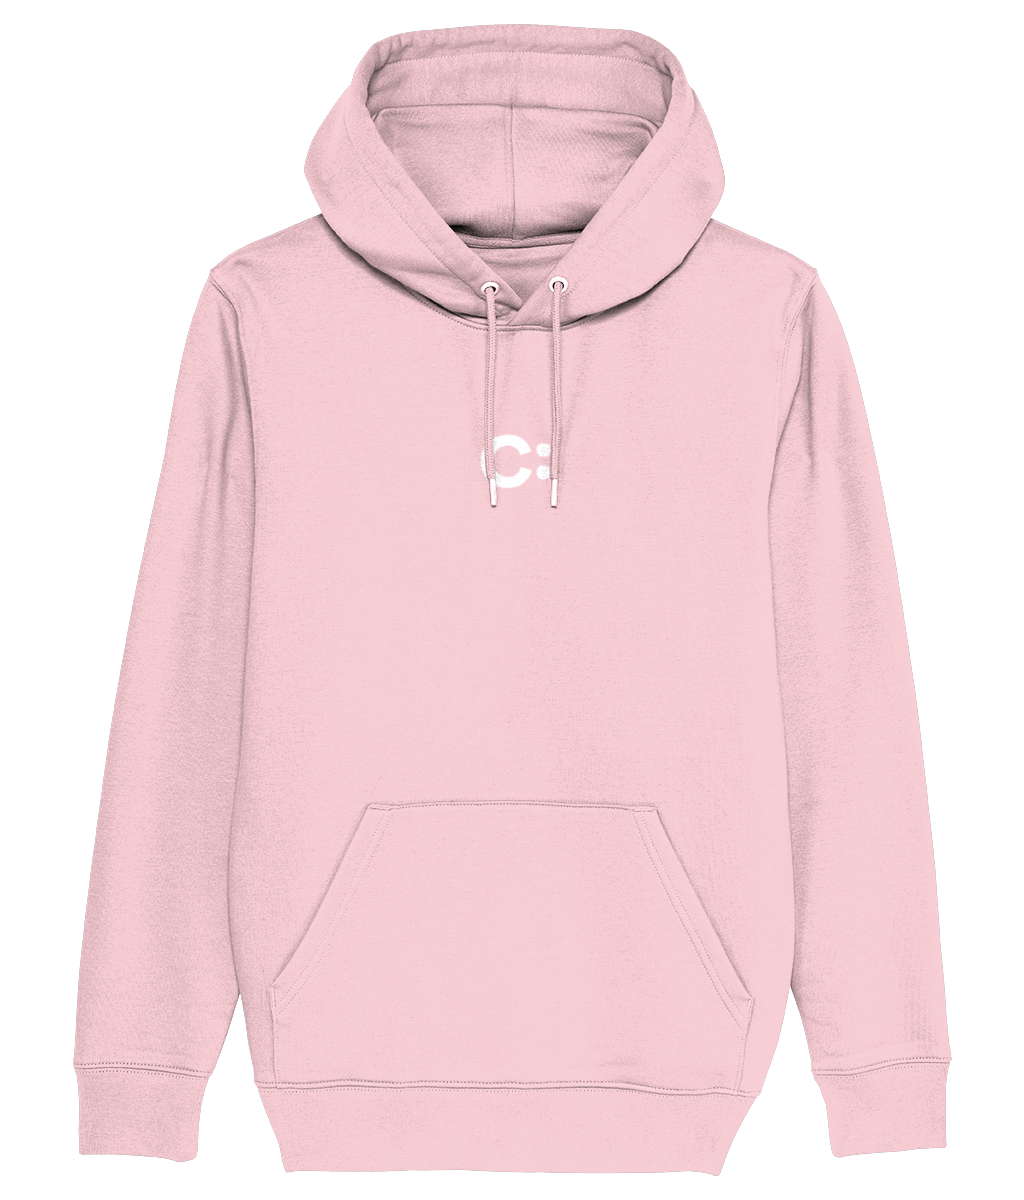 The Whiteout 'C' Hoodie